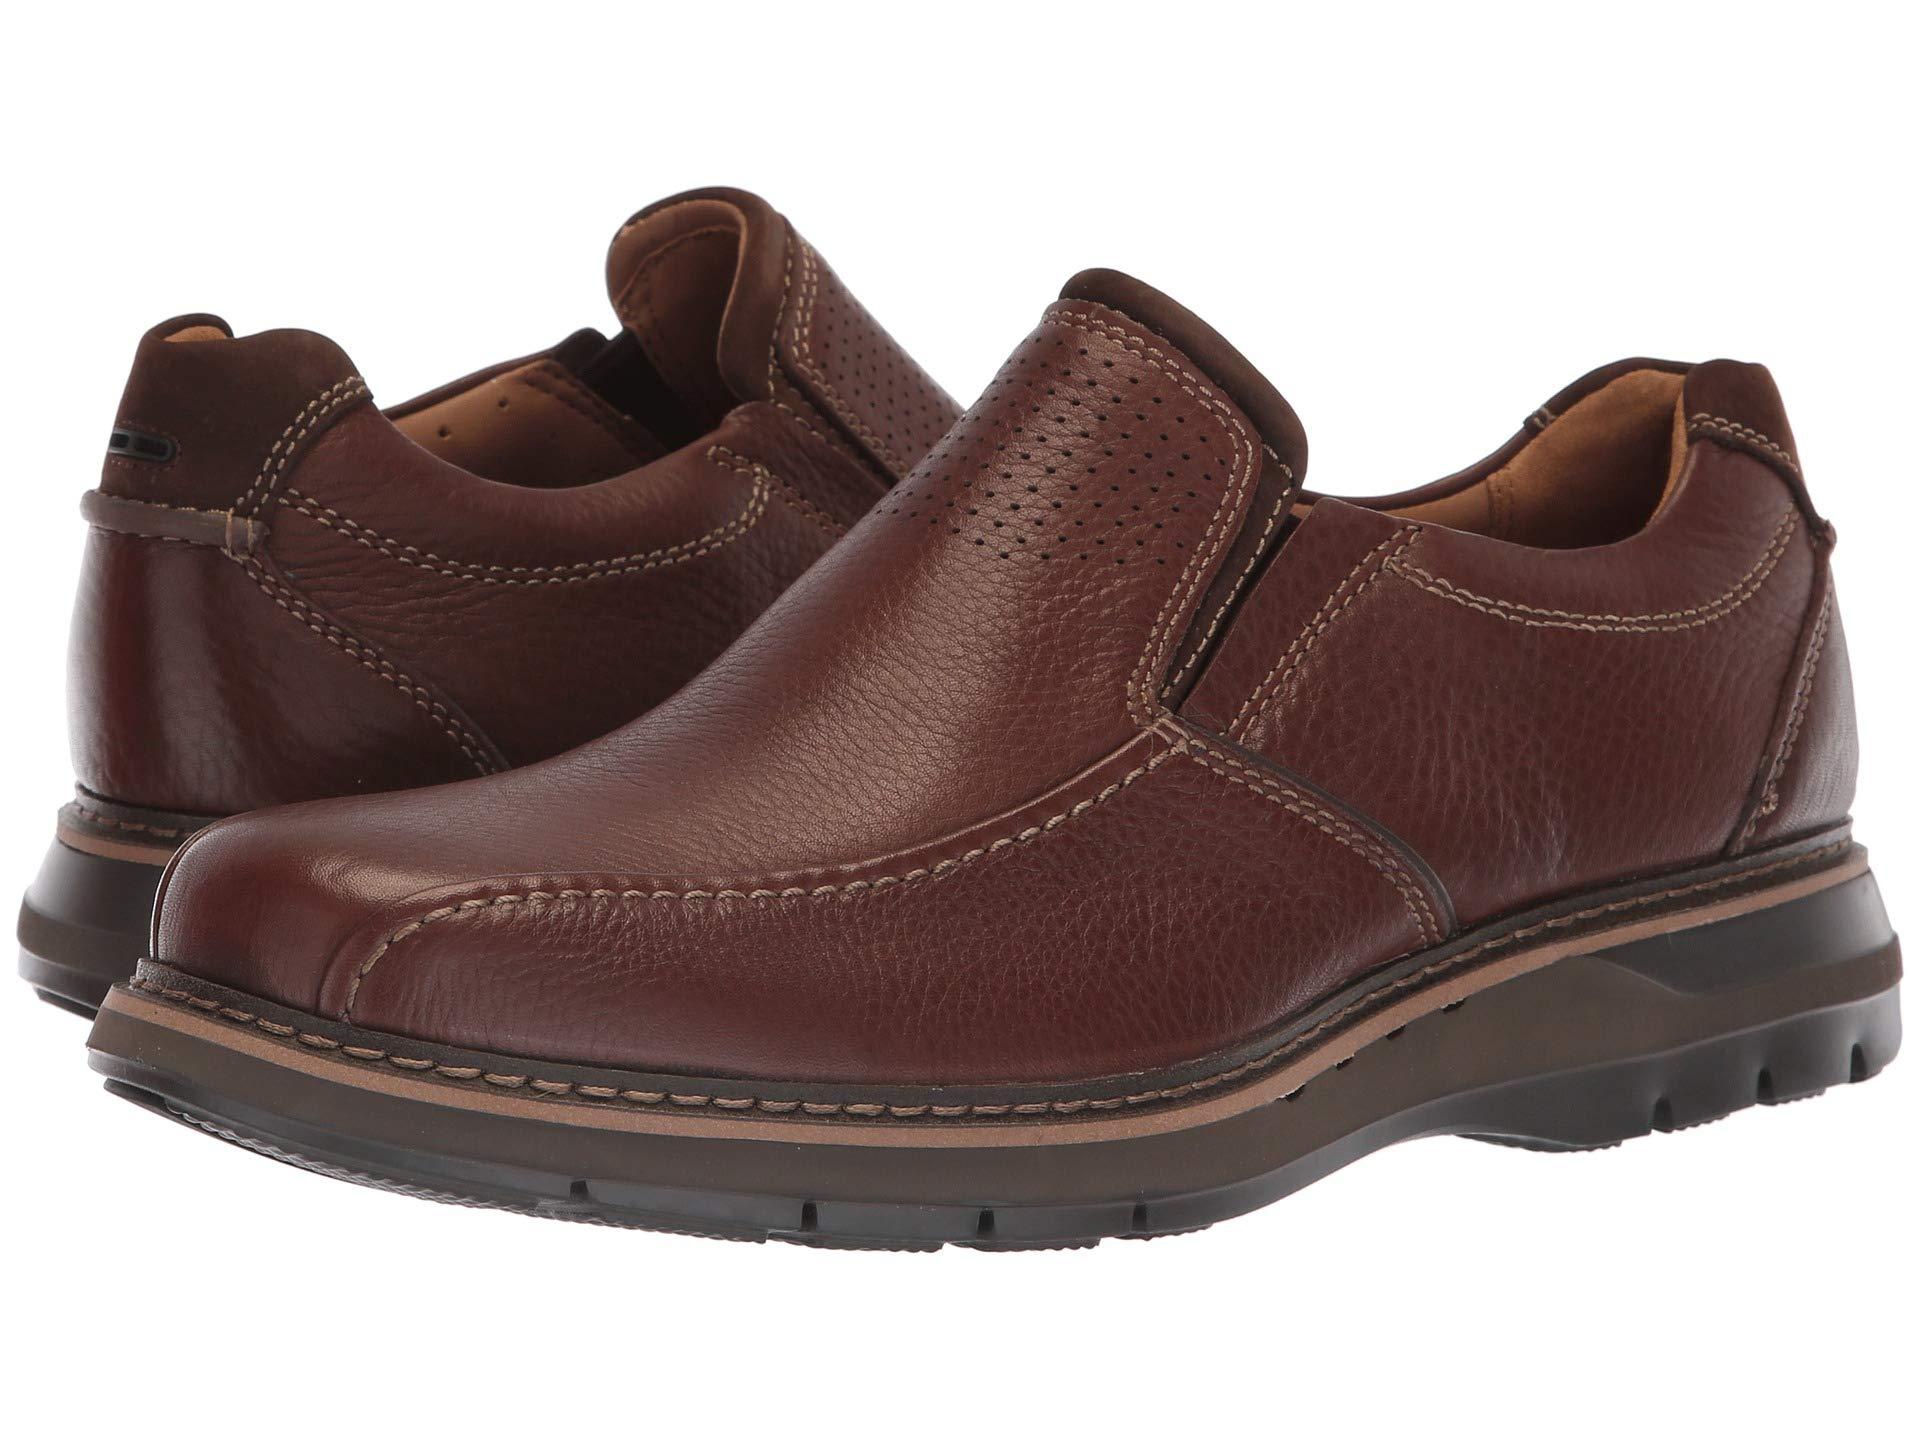 Clarks Denim Un Ramble Step in Mahogany (Brown) for Men - Save 3% - Lyst